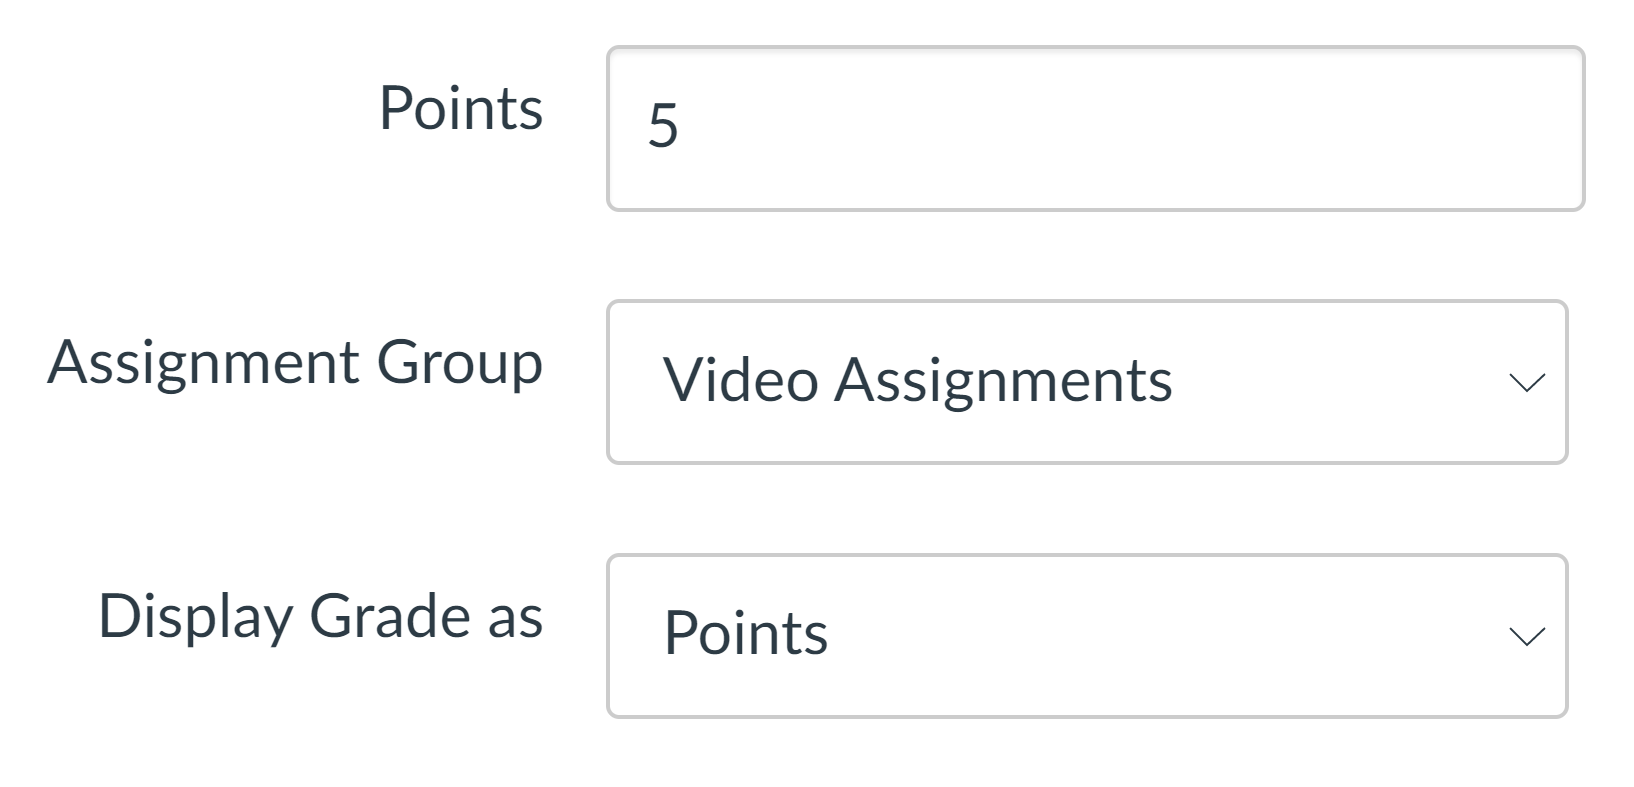 Points are set to five. Assignment group is set to video assignment, and displayed grade as is set to points.